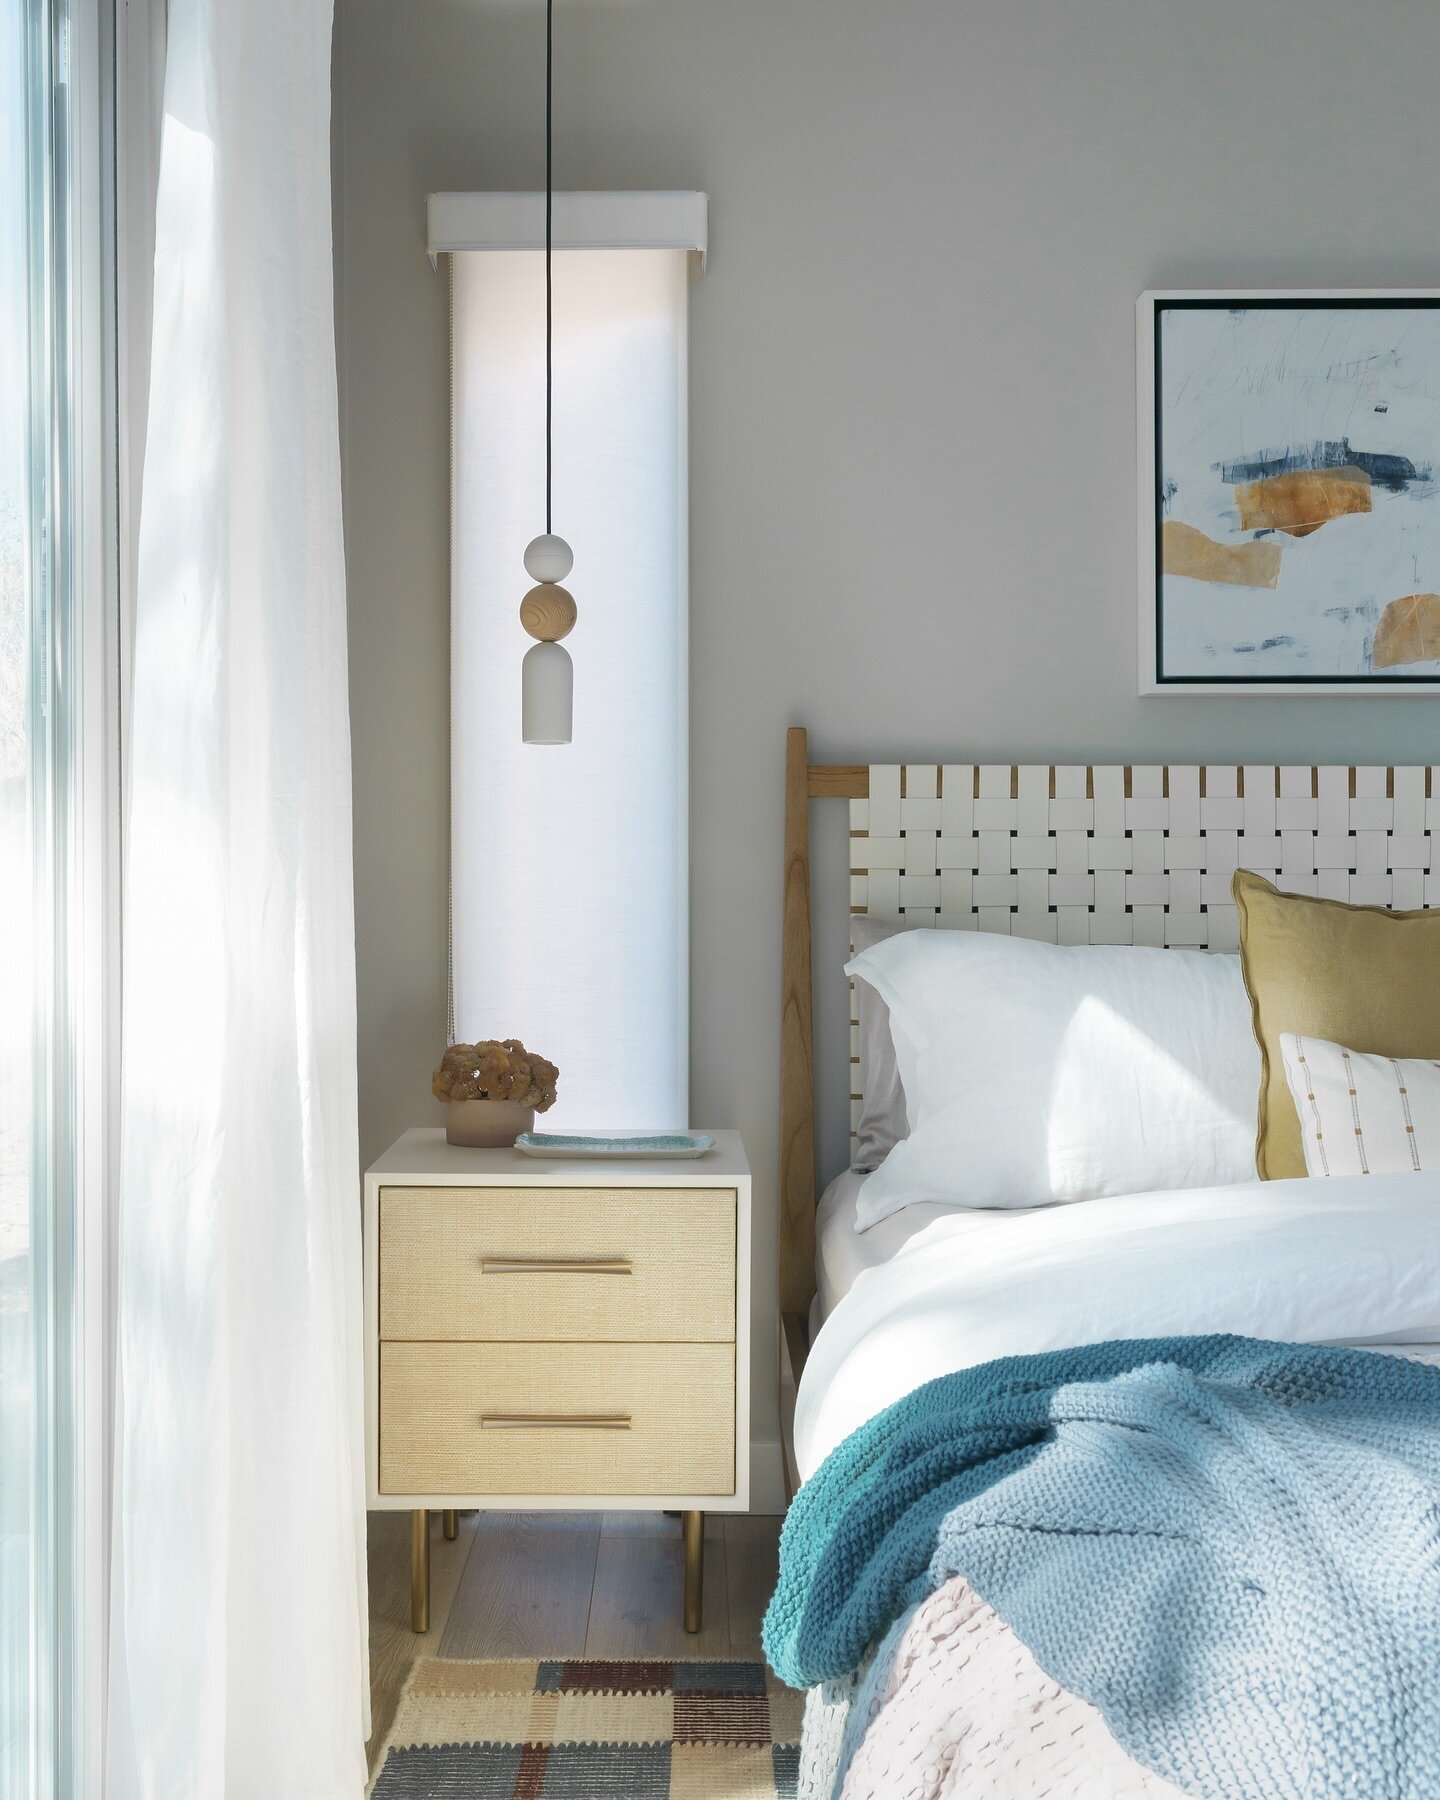 Along with a few renovations, been working on a few furnishing designs - lots of bedrooms. Serene neutral foundations with color is on the horizon! 🌈

Project #StayInAltaVista
📷 @charlotteleaphotography 
.
.
.
#StayInteriors #BedroomDesign #Bedroom